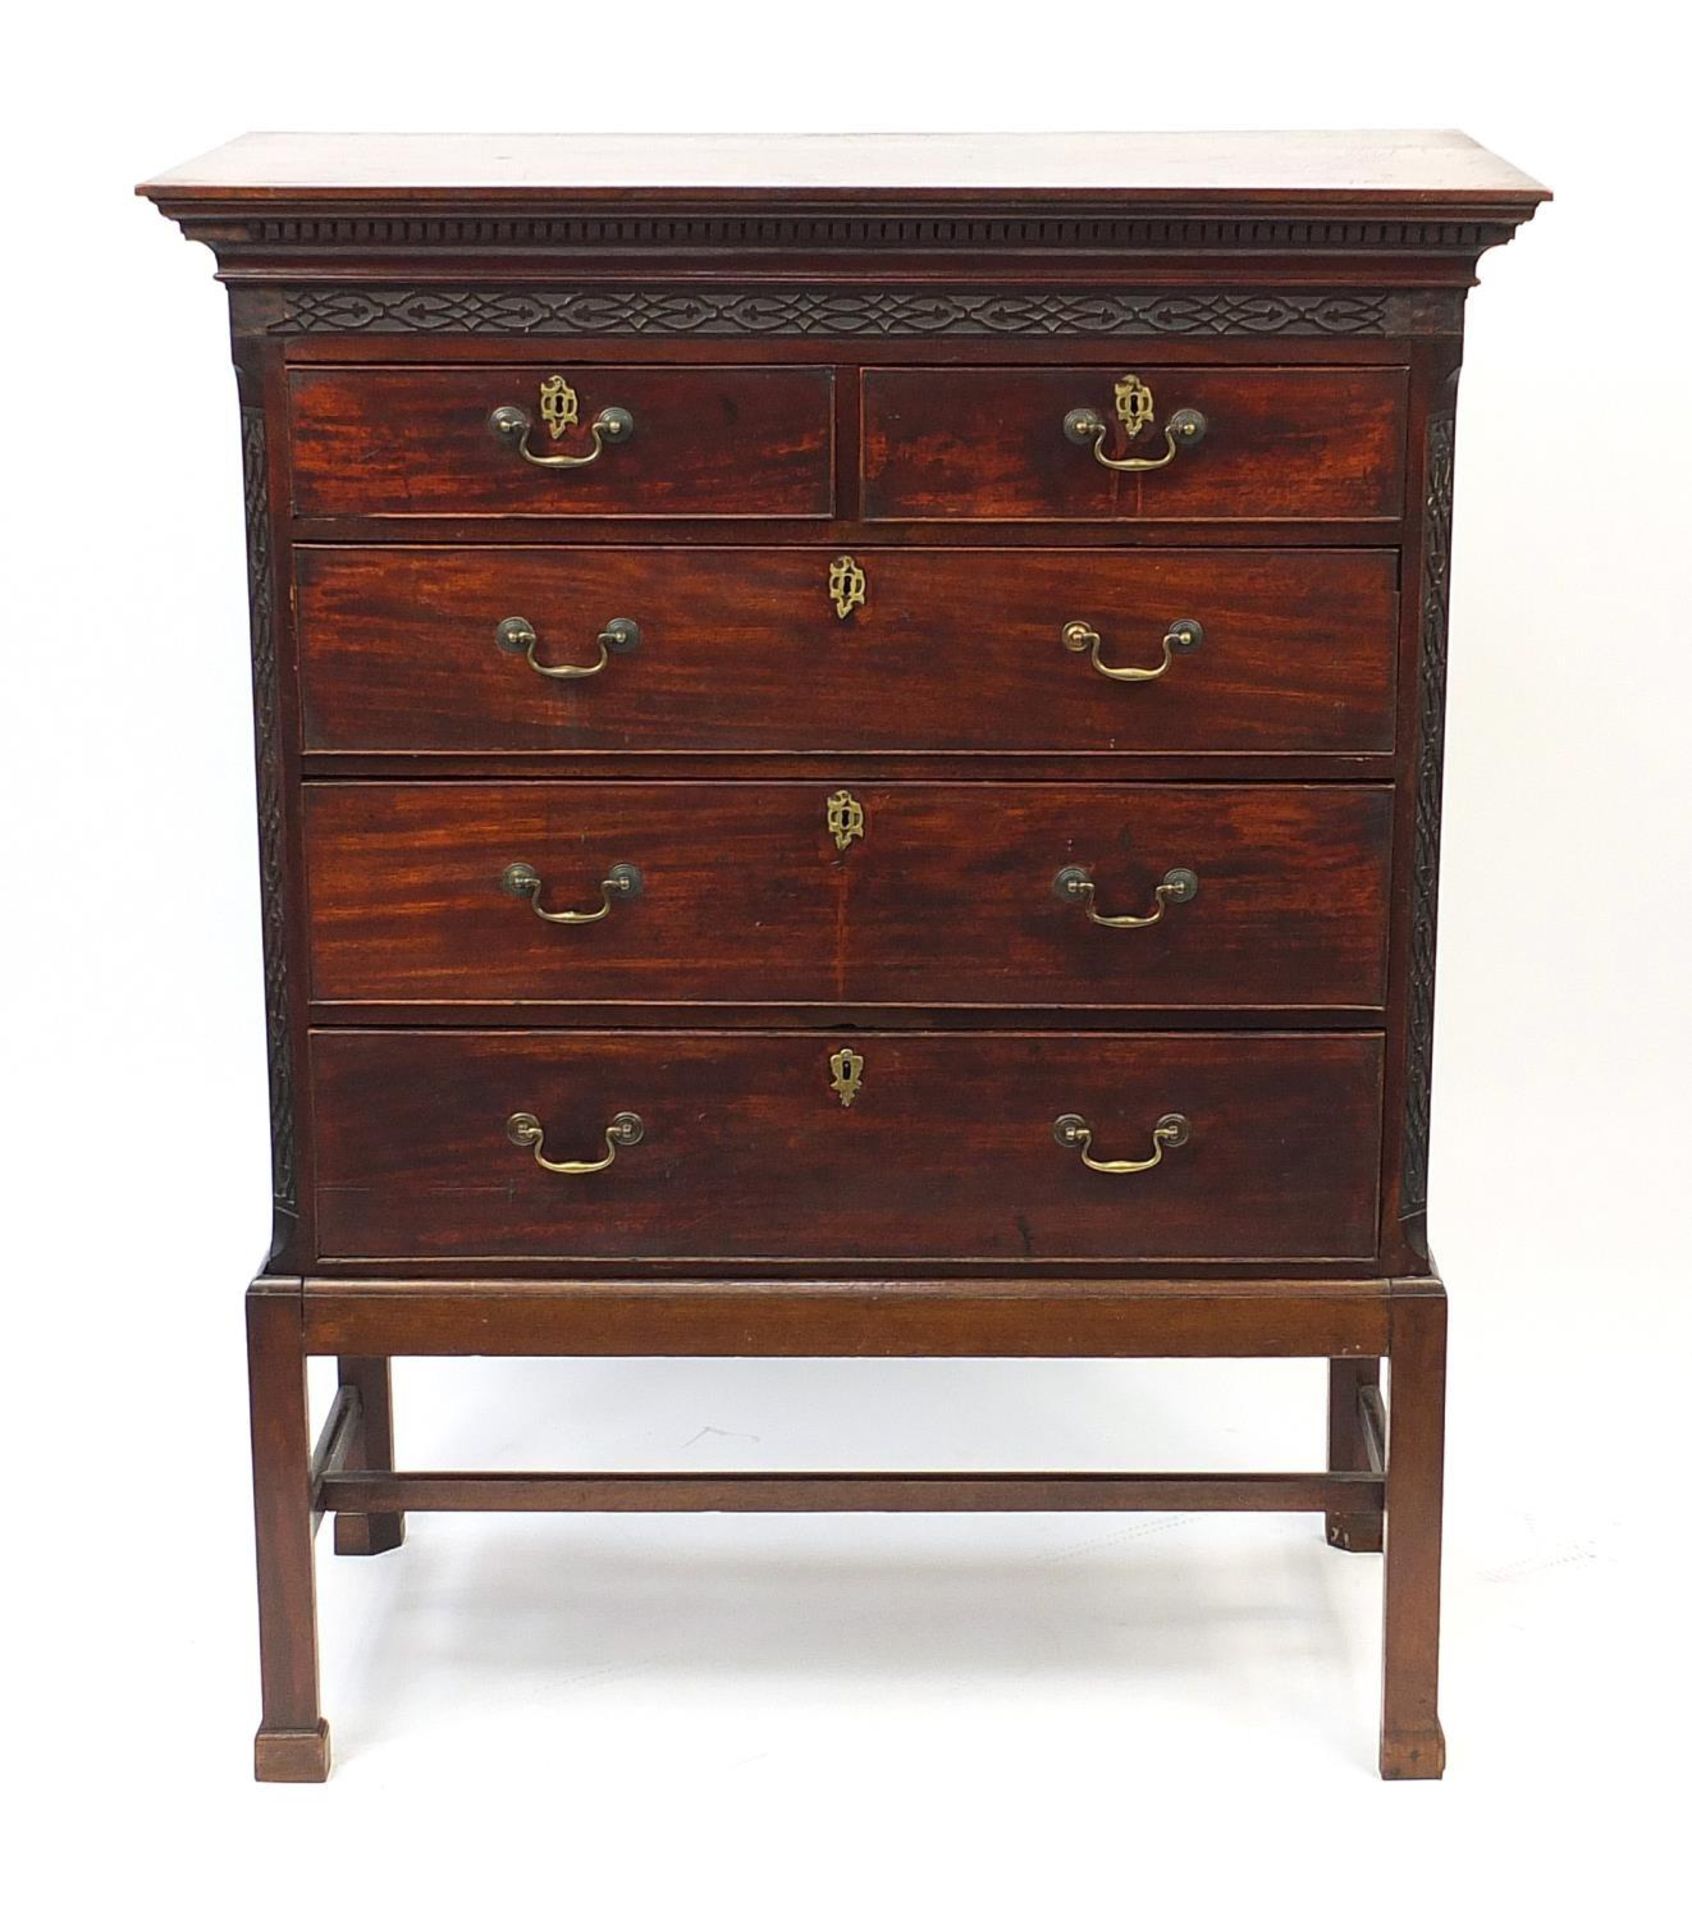 Antique mahogany five drawer chest on stand with blind fretwork, 147cm H x 116cm W x 57.5cm D : - Image 2 of 4